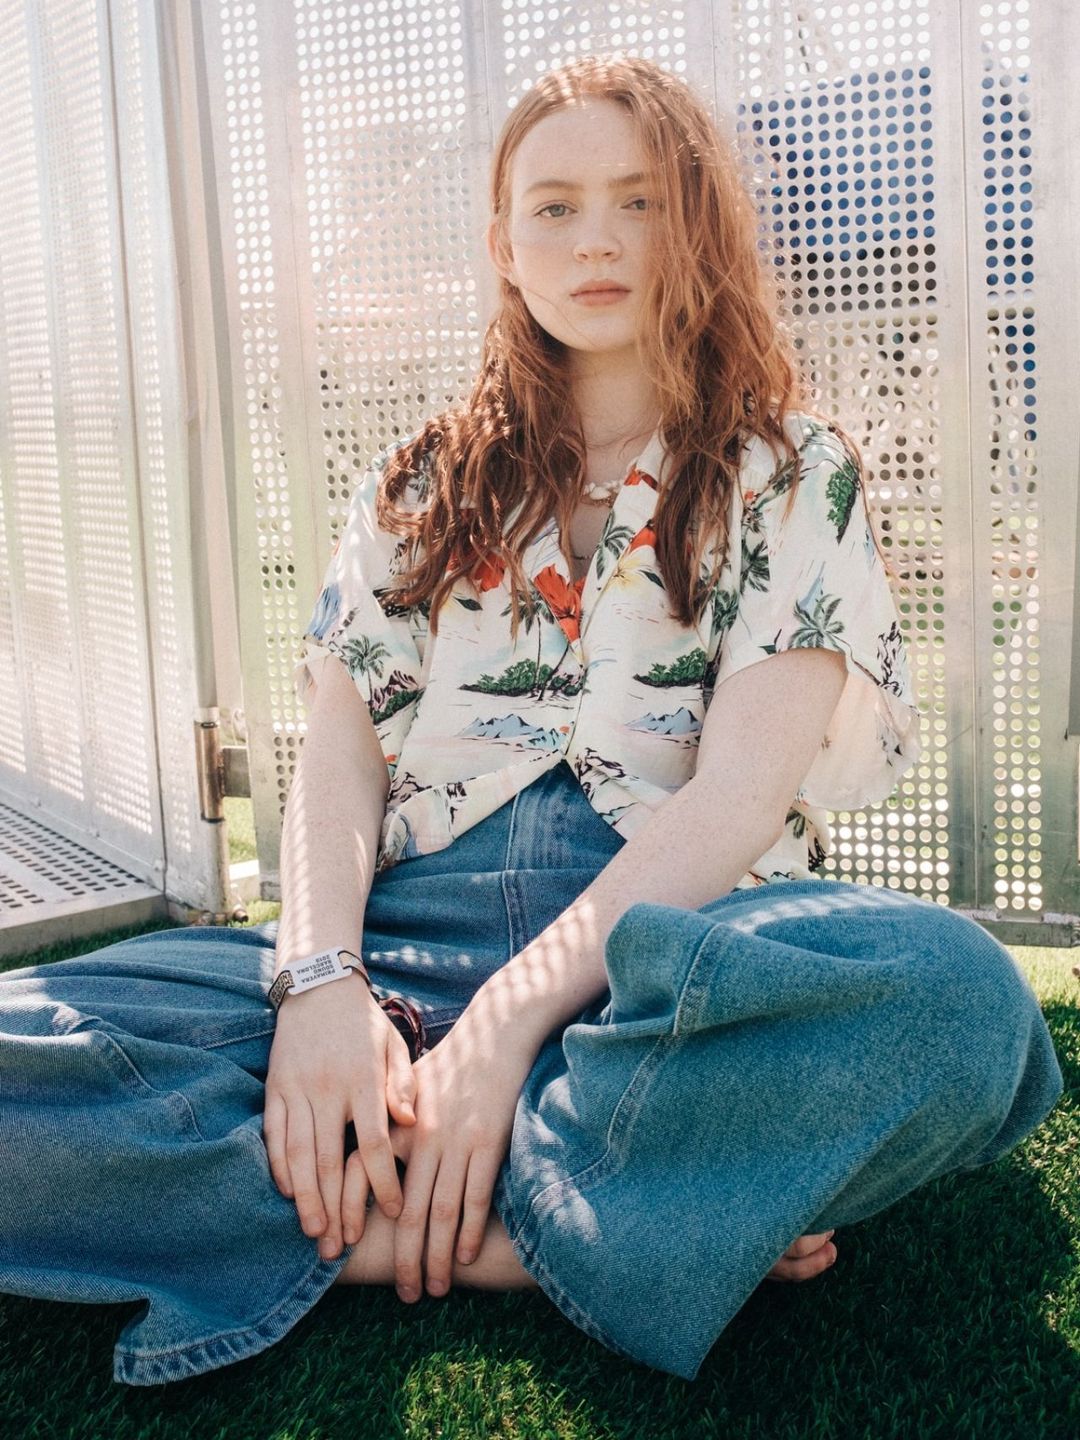 Sadie Sink height and weight